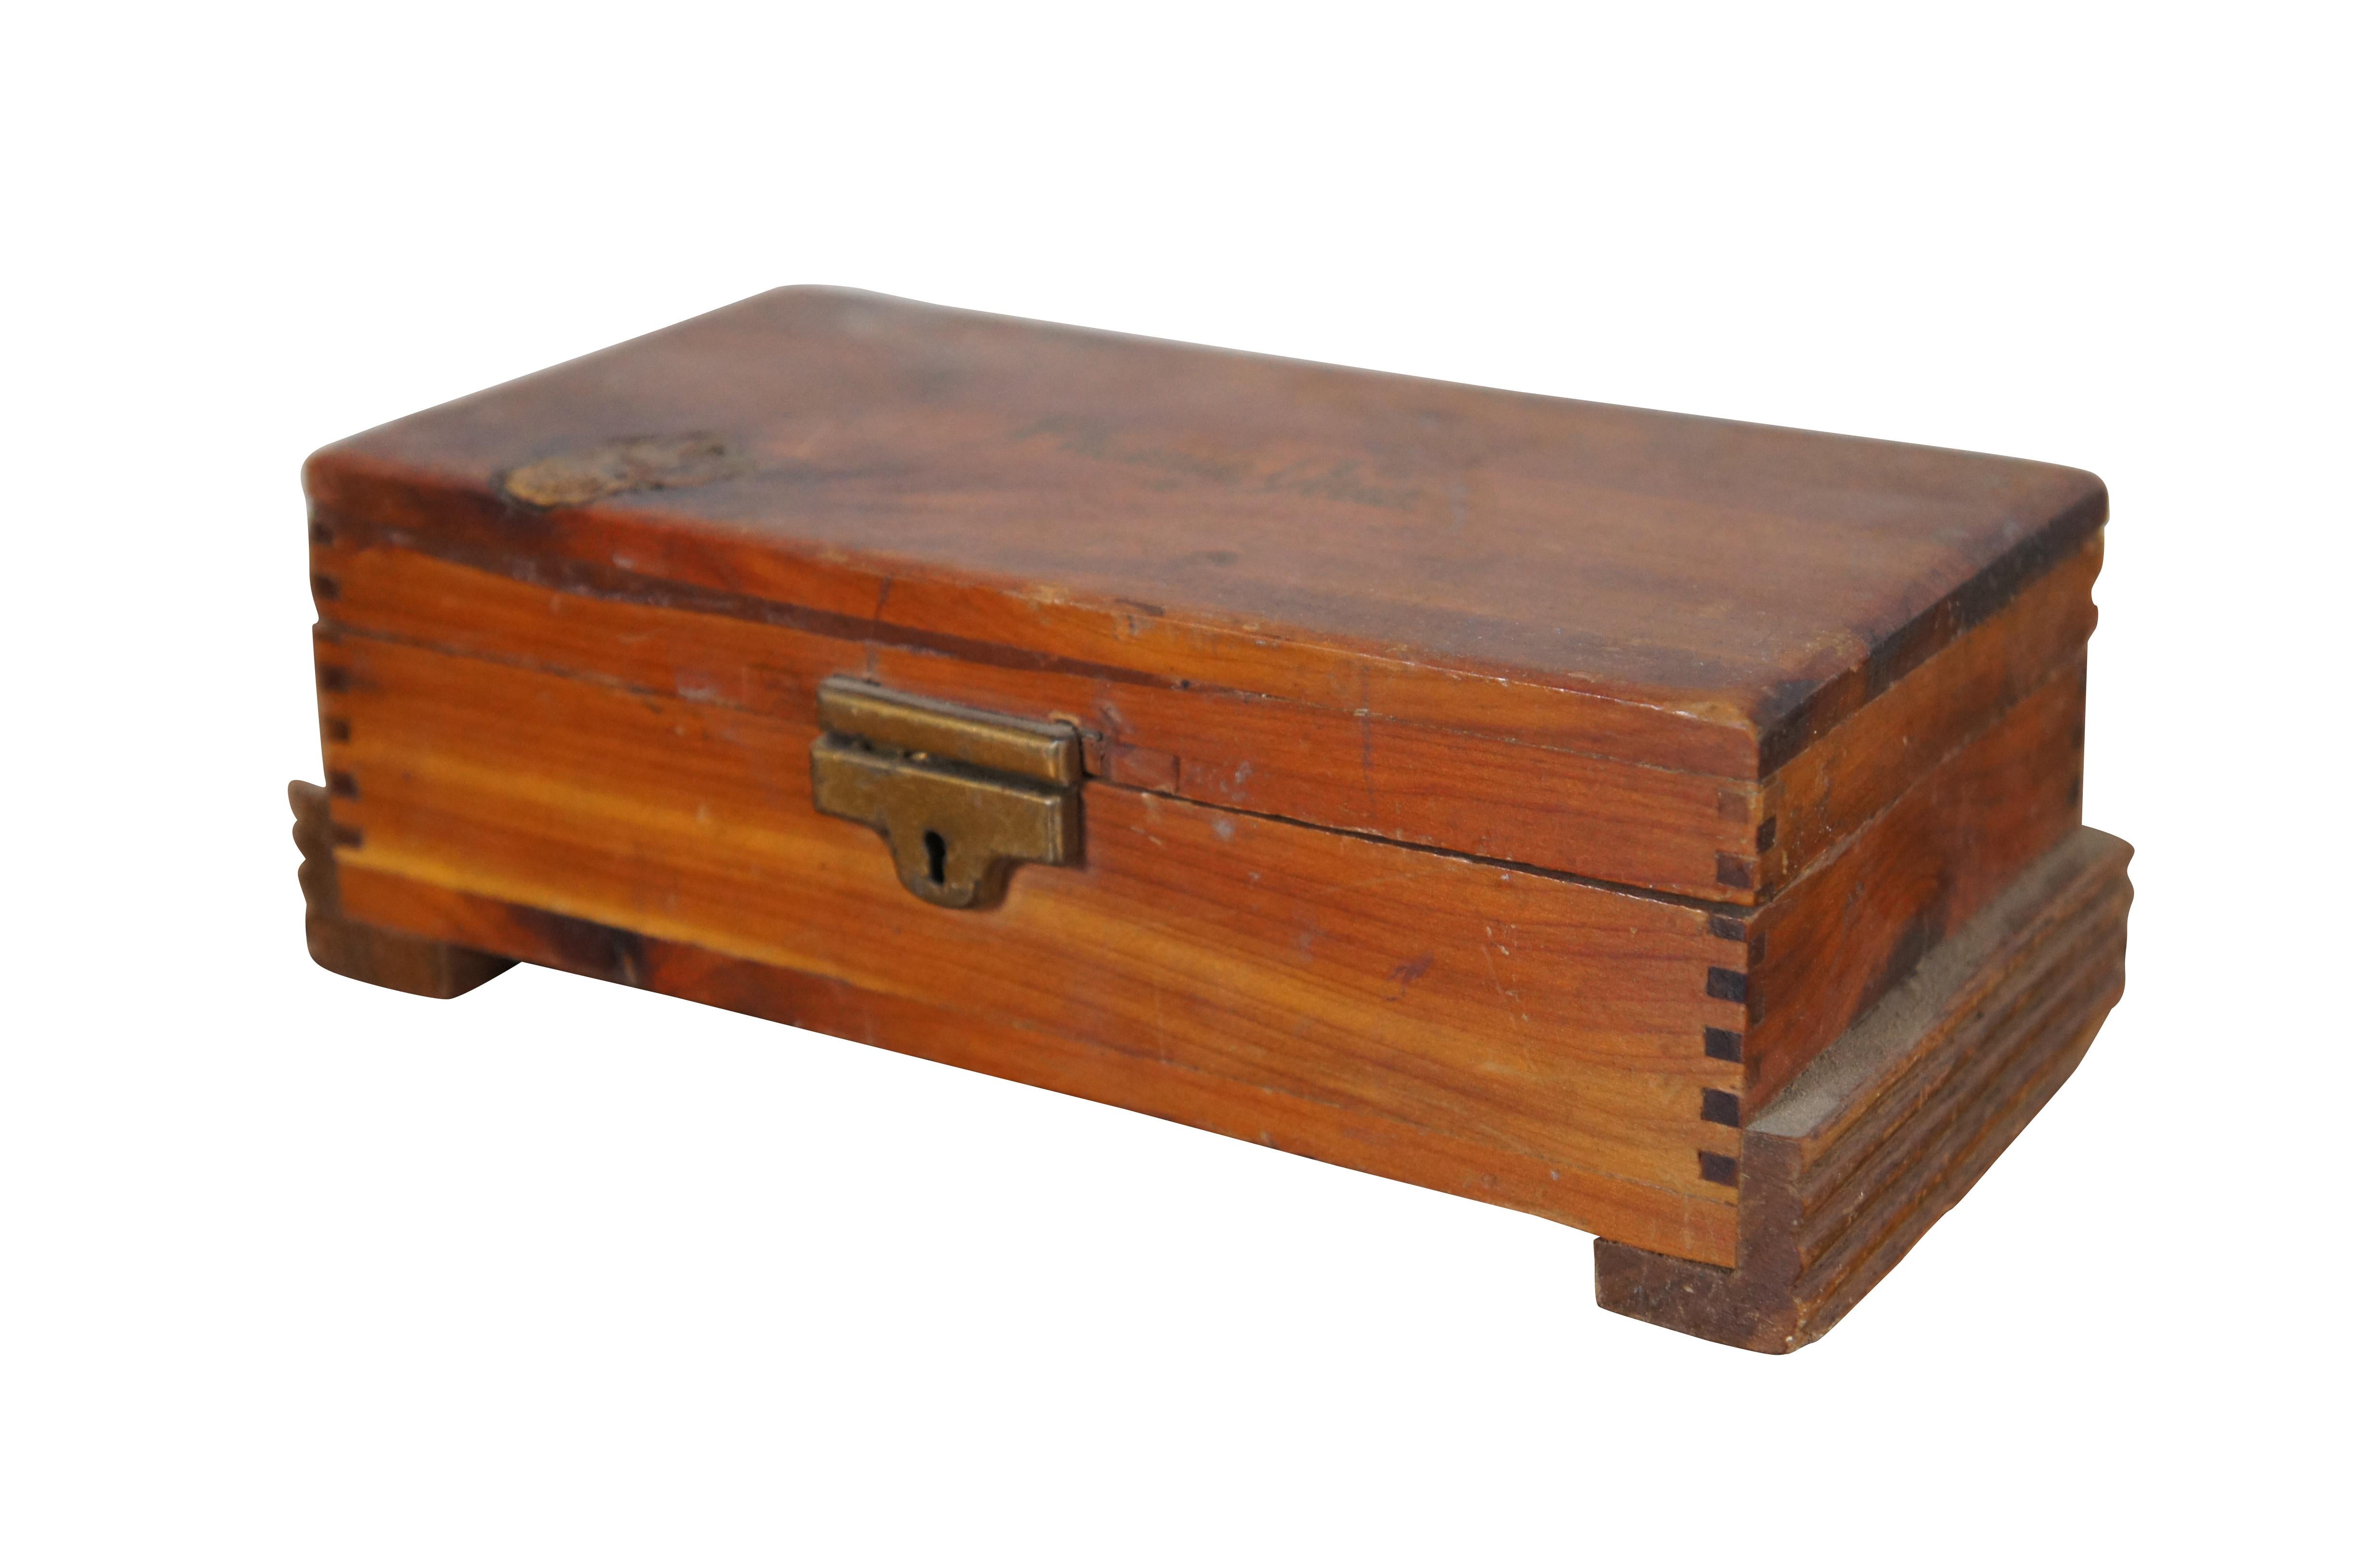 Vintage pine souvenir keepsake box featuring dovetailed joinery, footed base and brass hardware.  Phoenix, Arizona.

Dimensions:
7